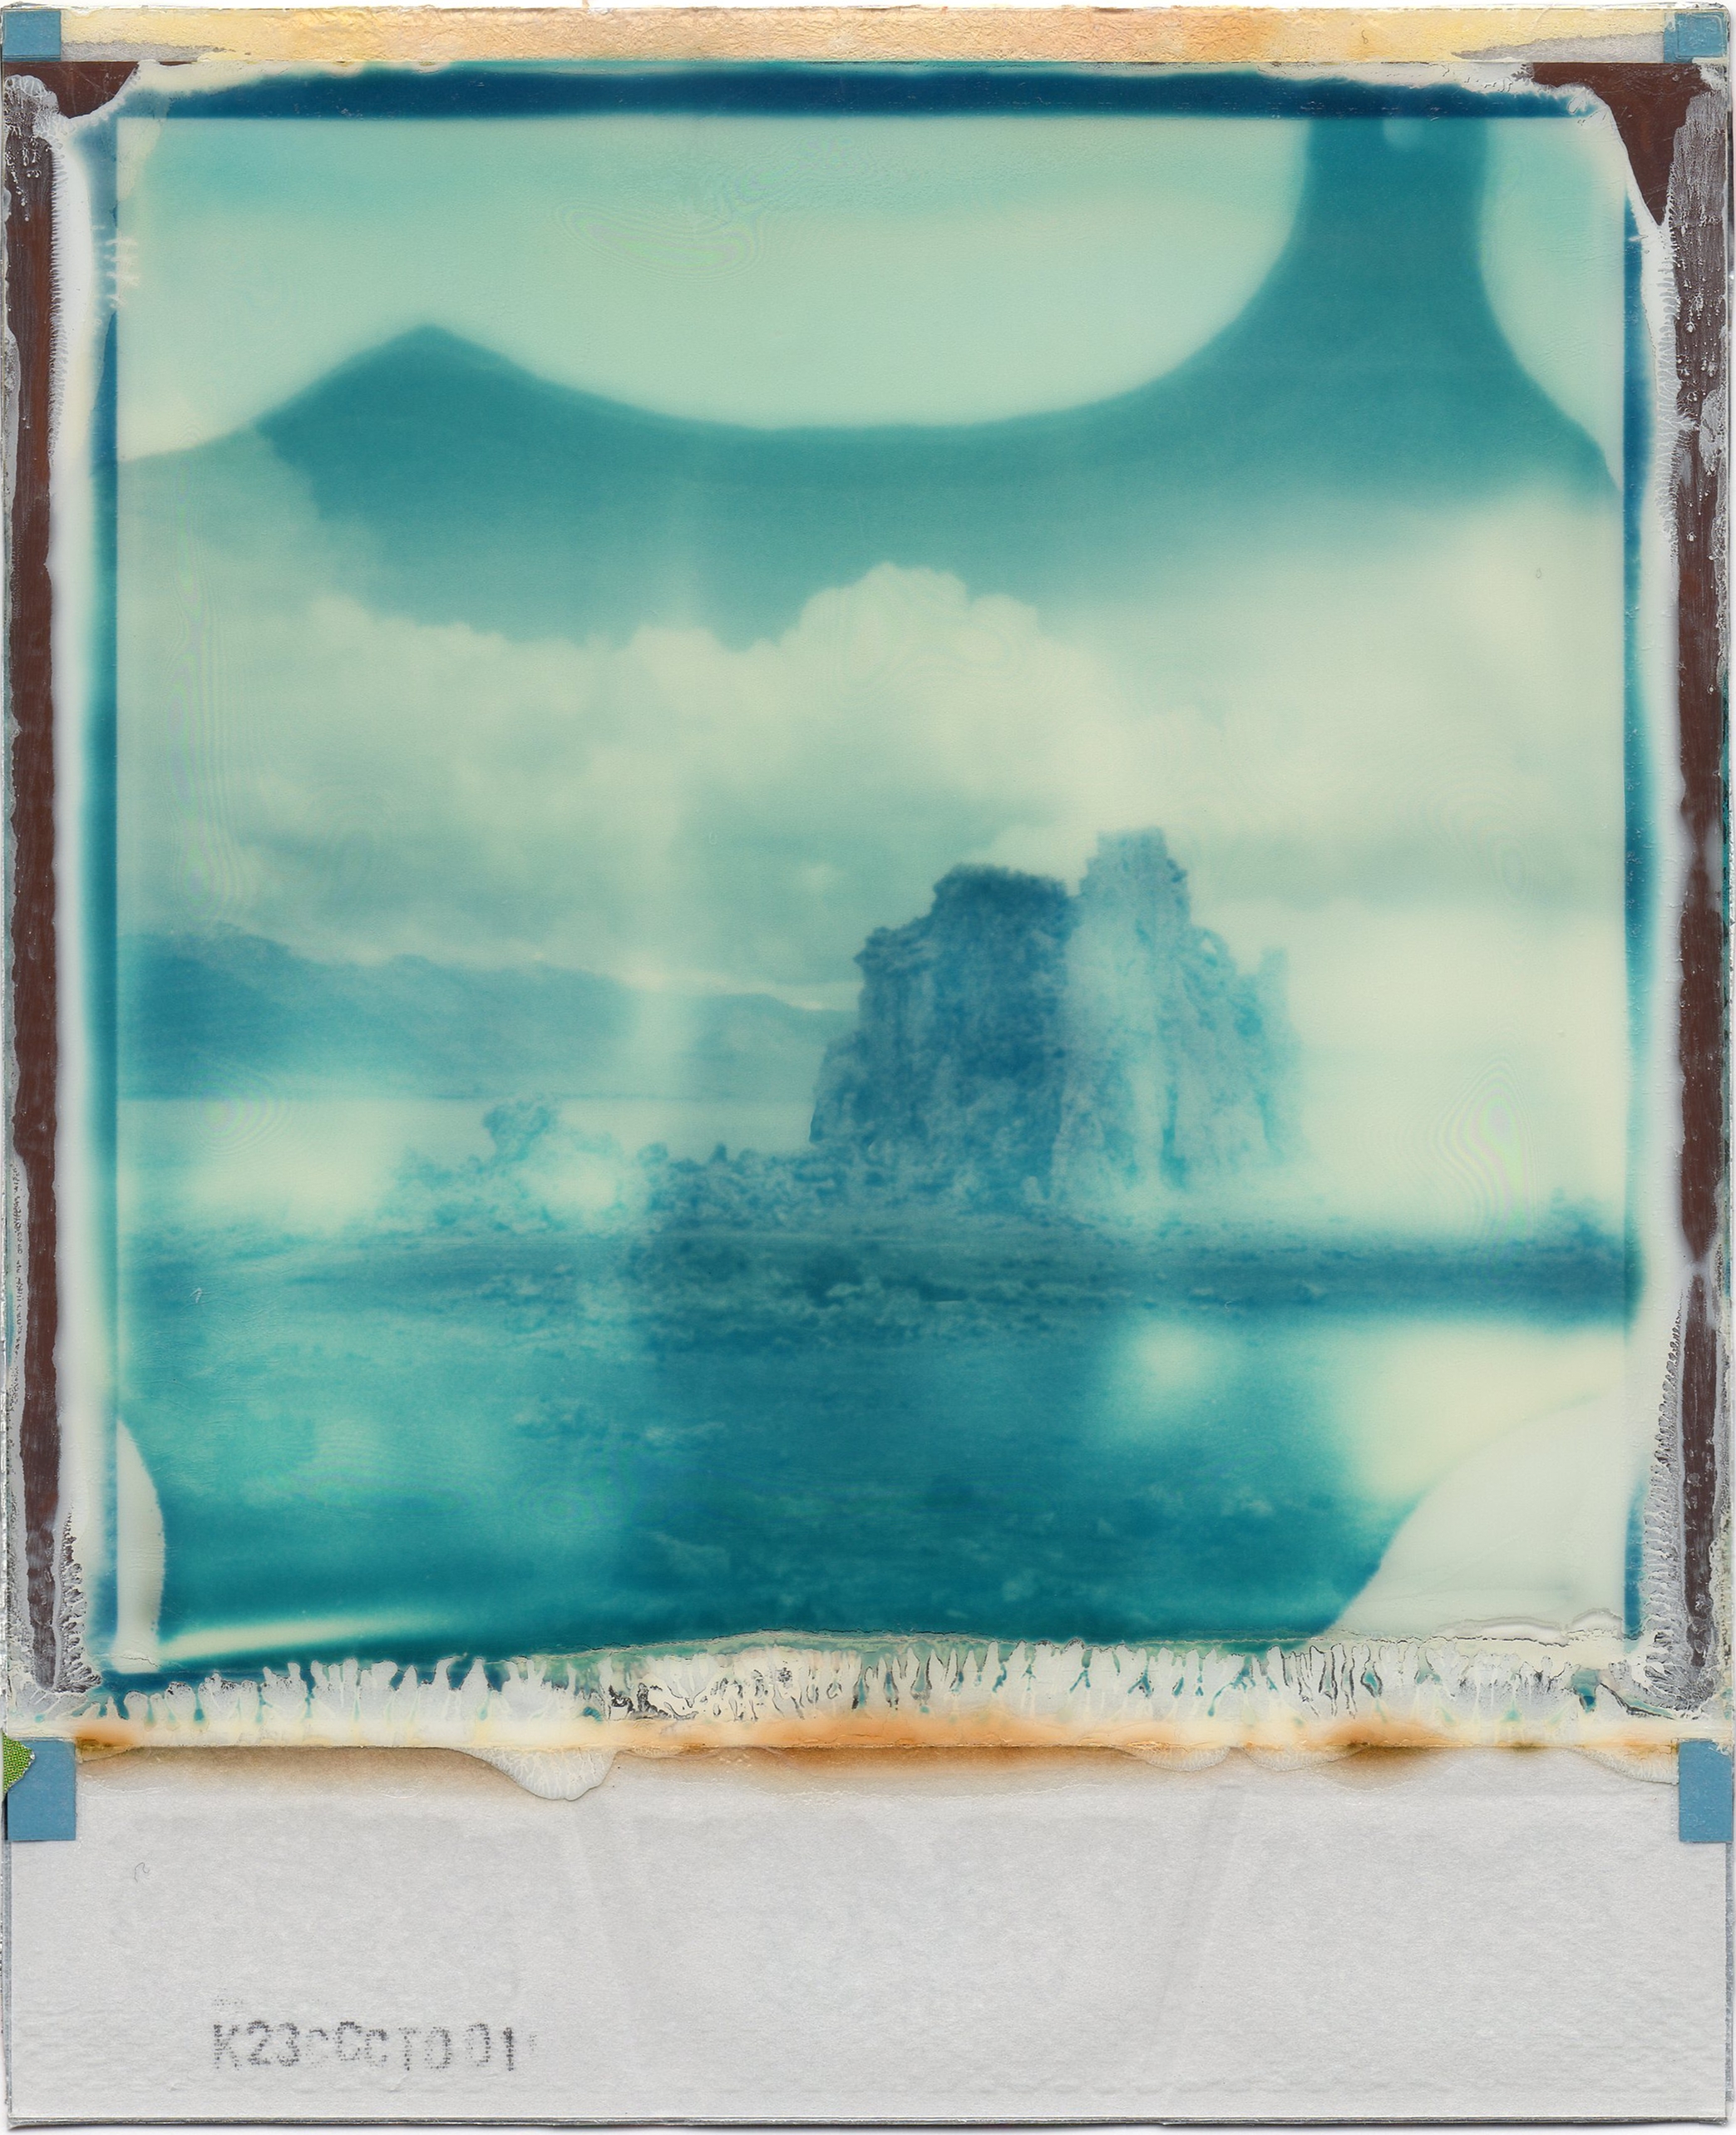 Into the Blue | Expired Impossible Poisoned Paradise 600 Film | Impossible I-1 | Julia Beyer